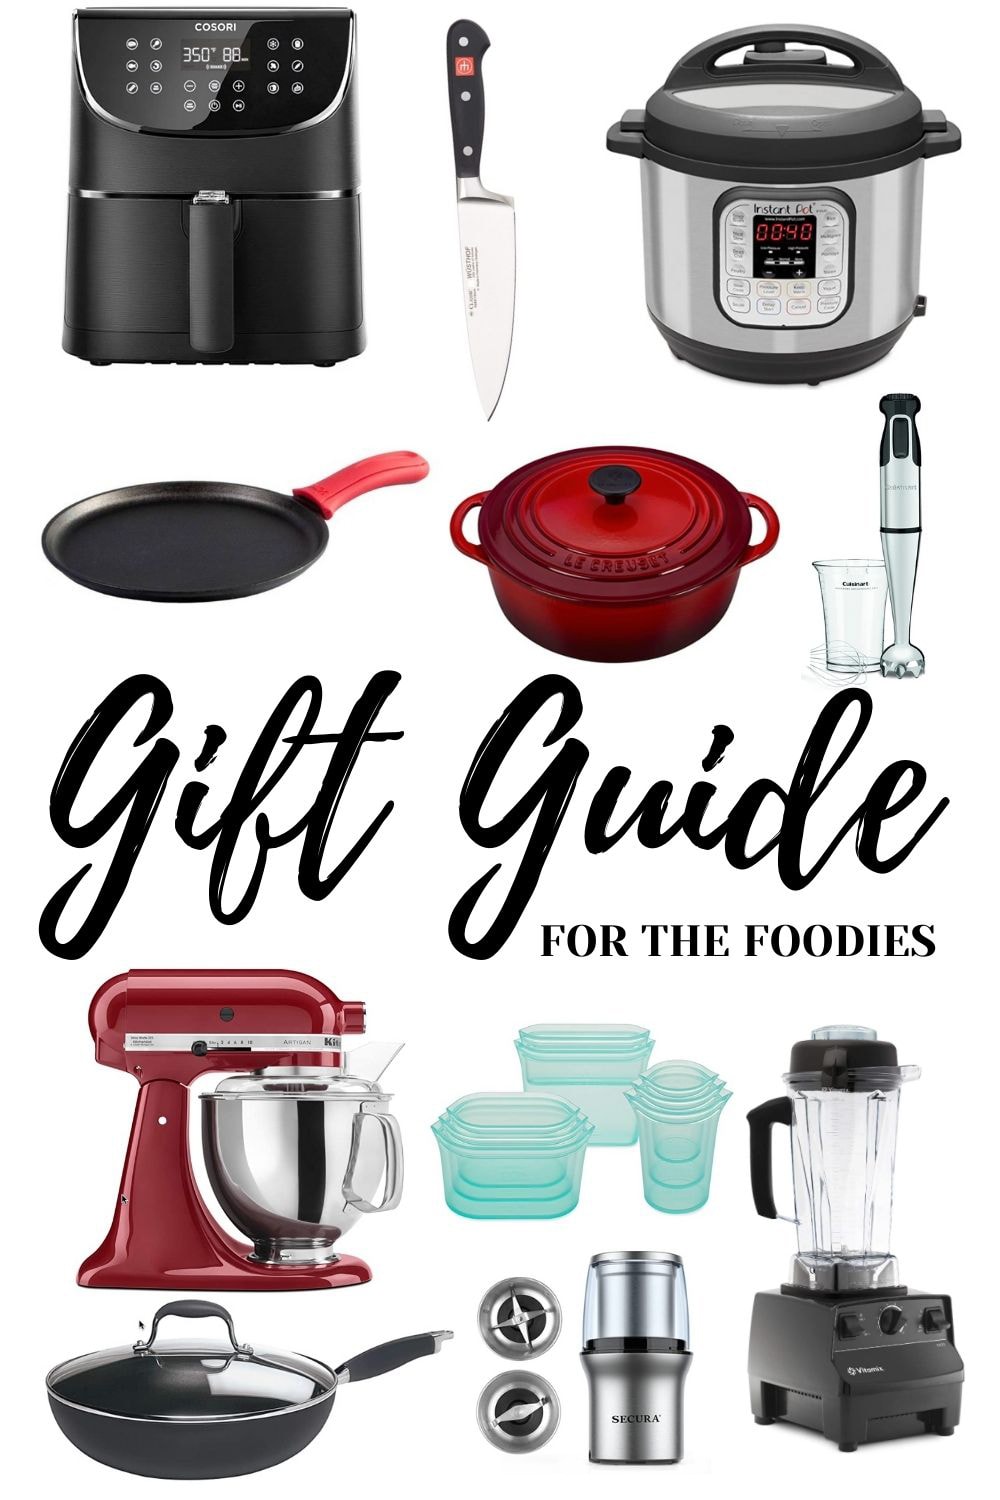 Holiday gift guide with lots of kitchen appliances for foodies and home cooks 